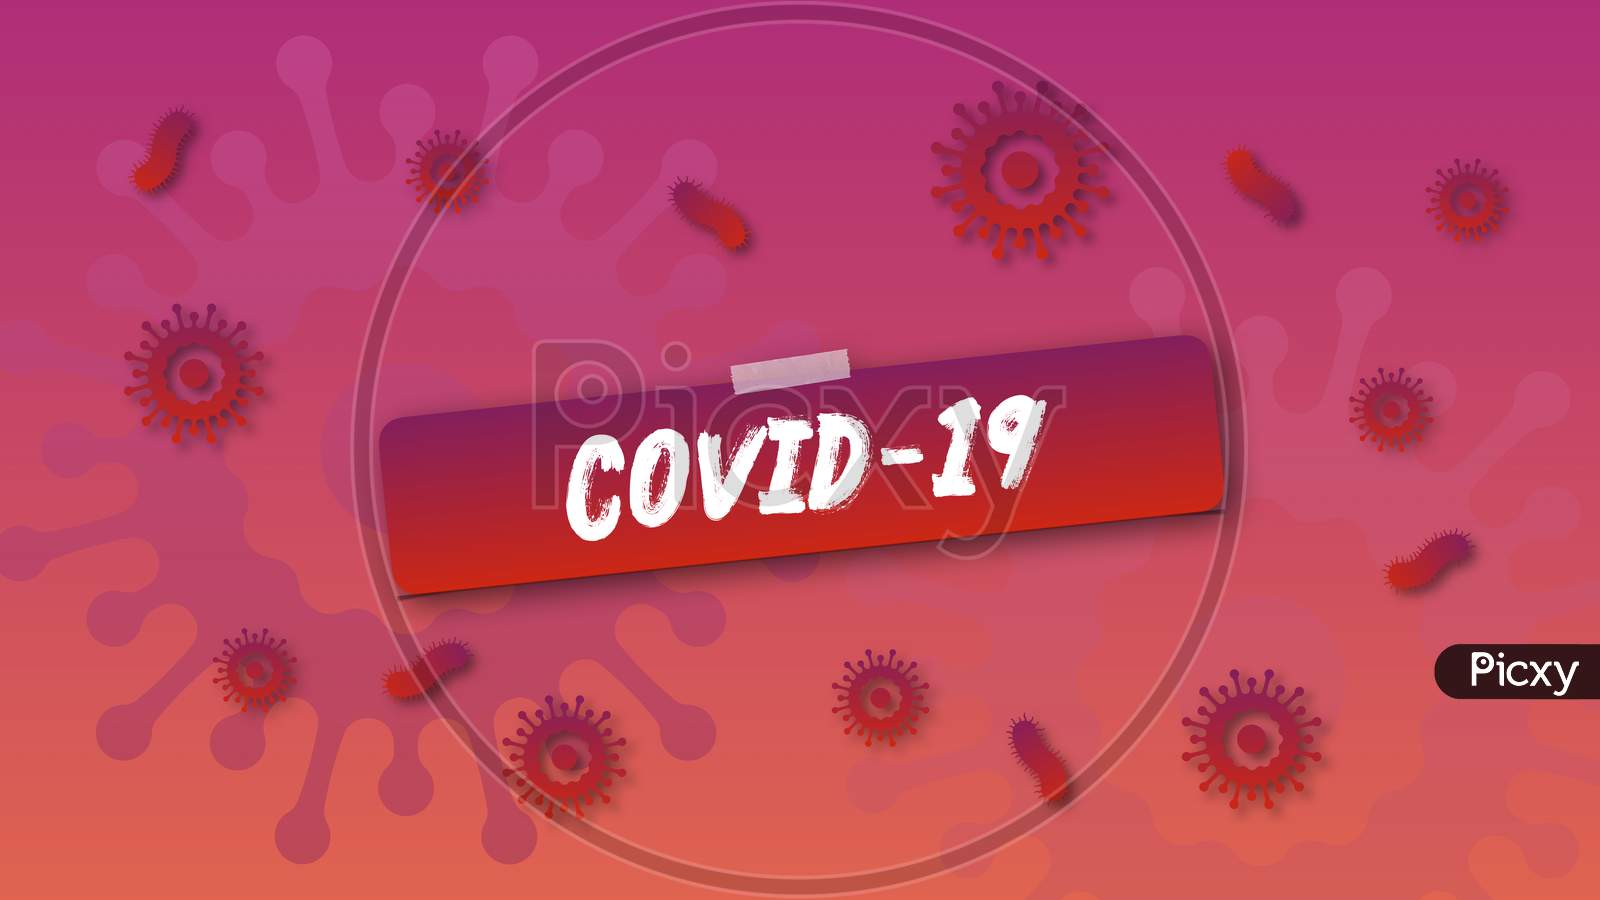 Covid-19 Text With Corona Virus Artificial Background